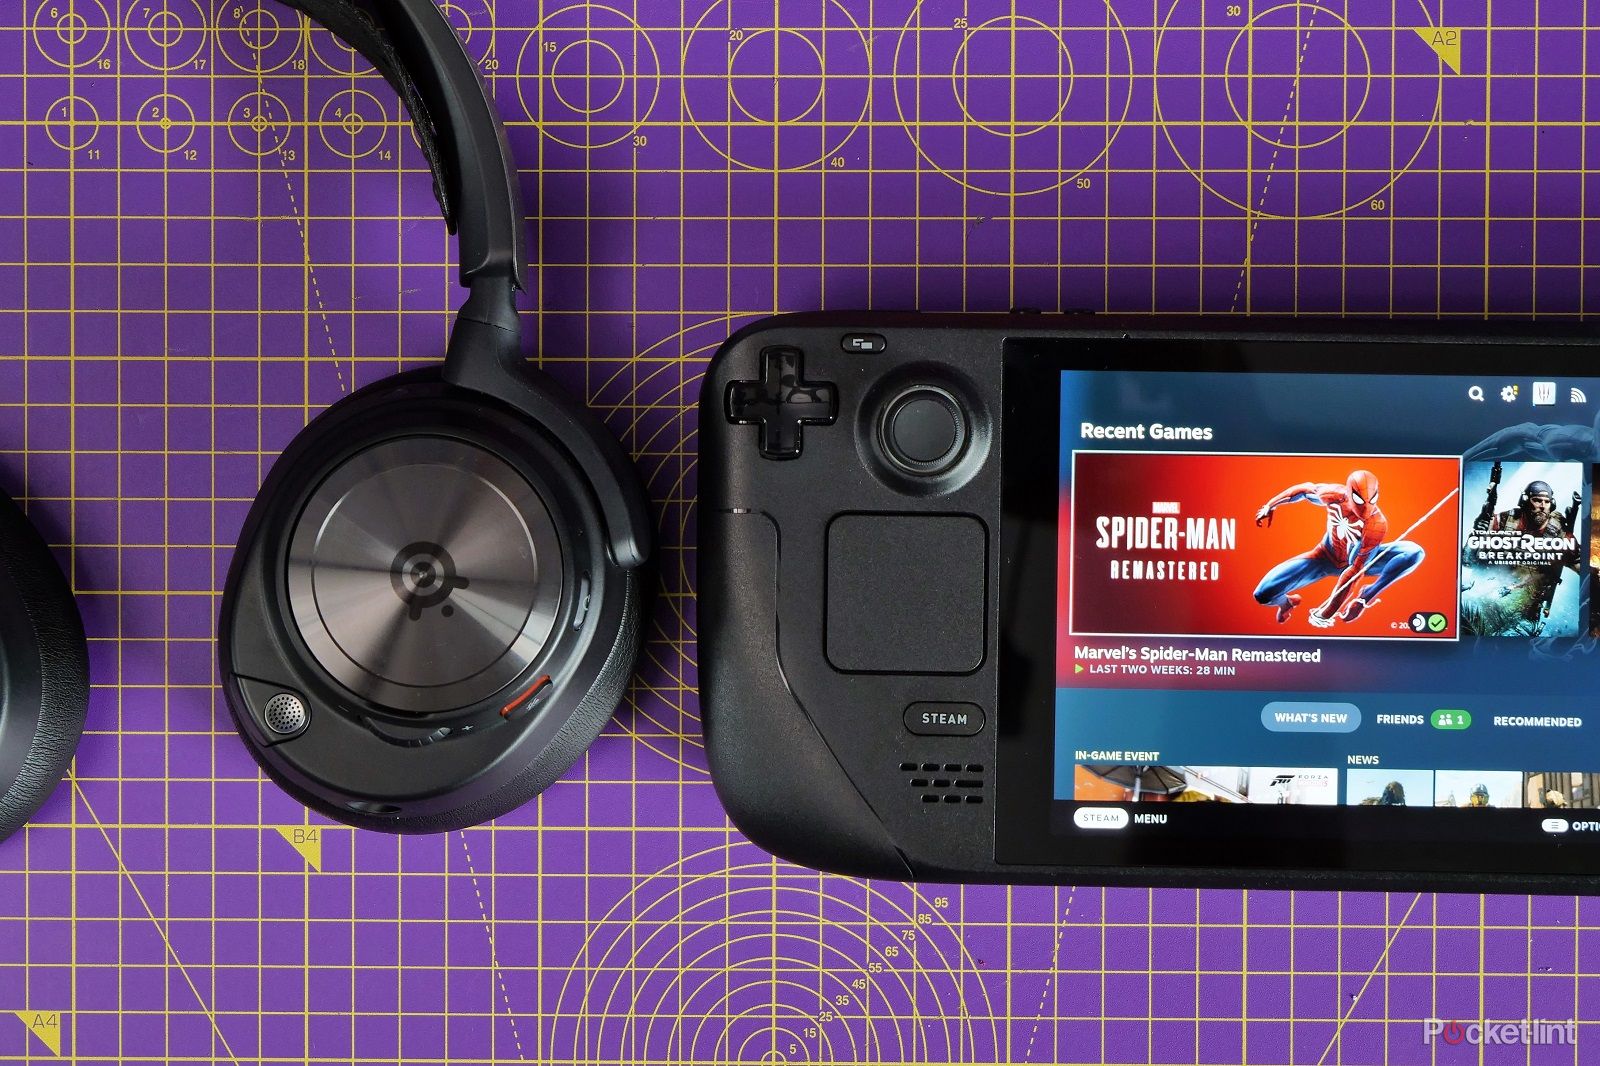 How to use Bluetooth headphones with your Steam Deck